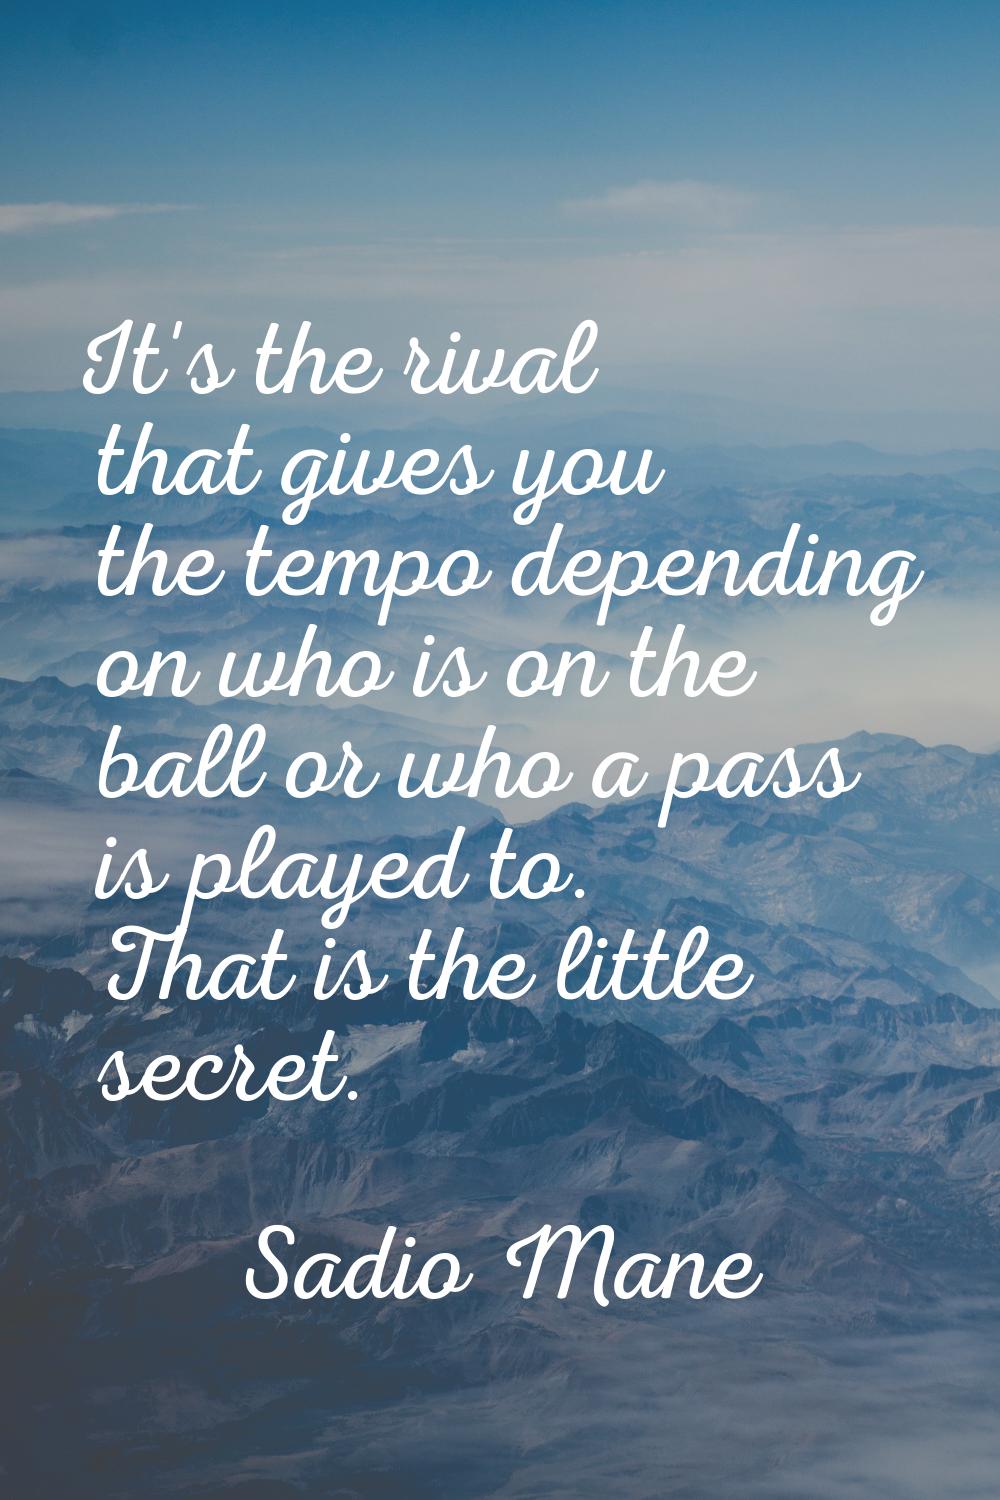 It's the rival that gives you the tempo depending on who is on the ball or who a pass is played to.